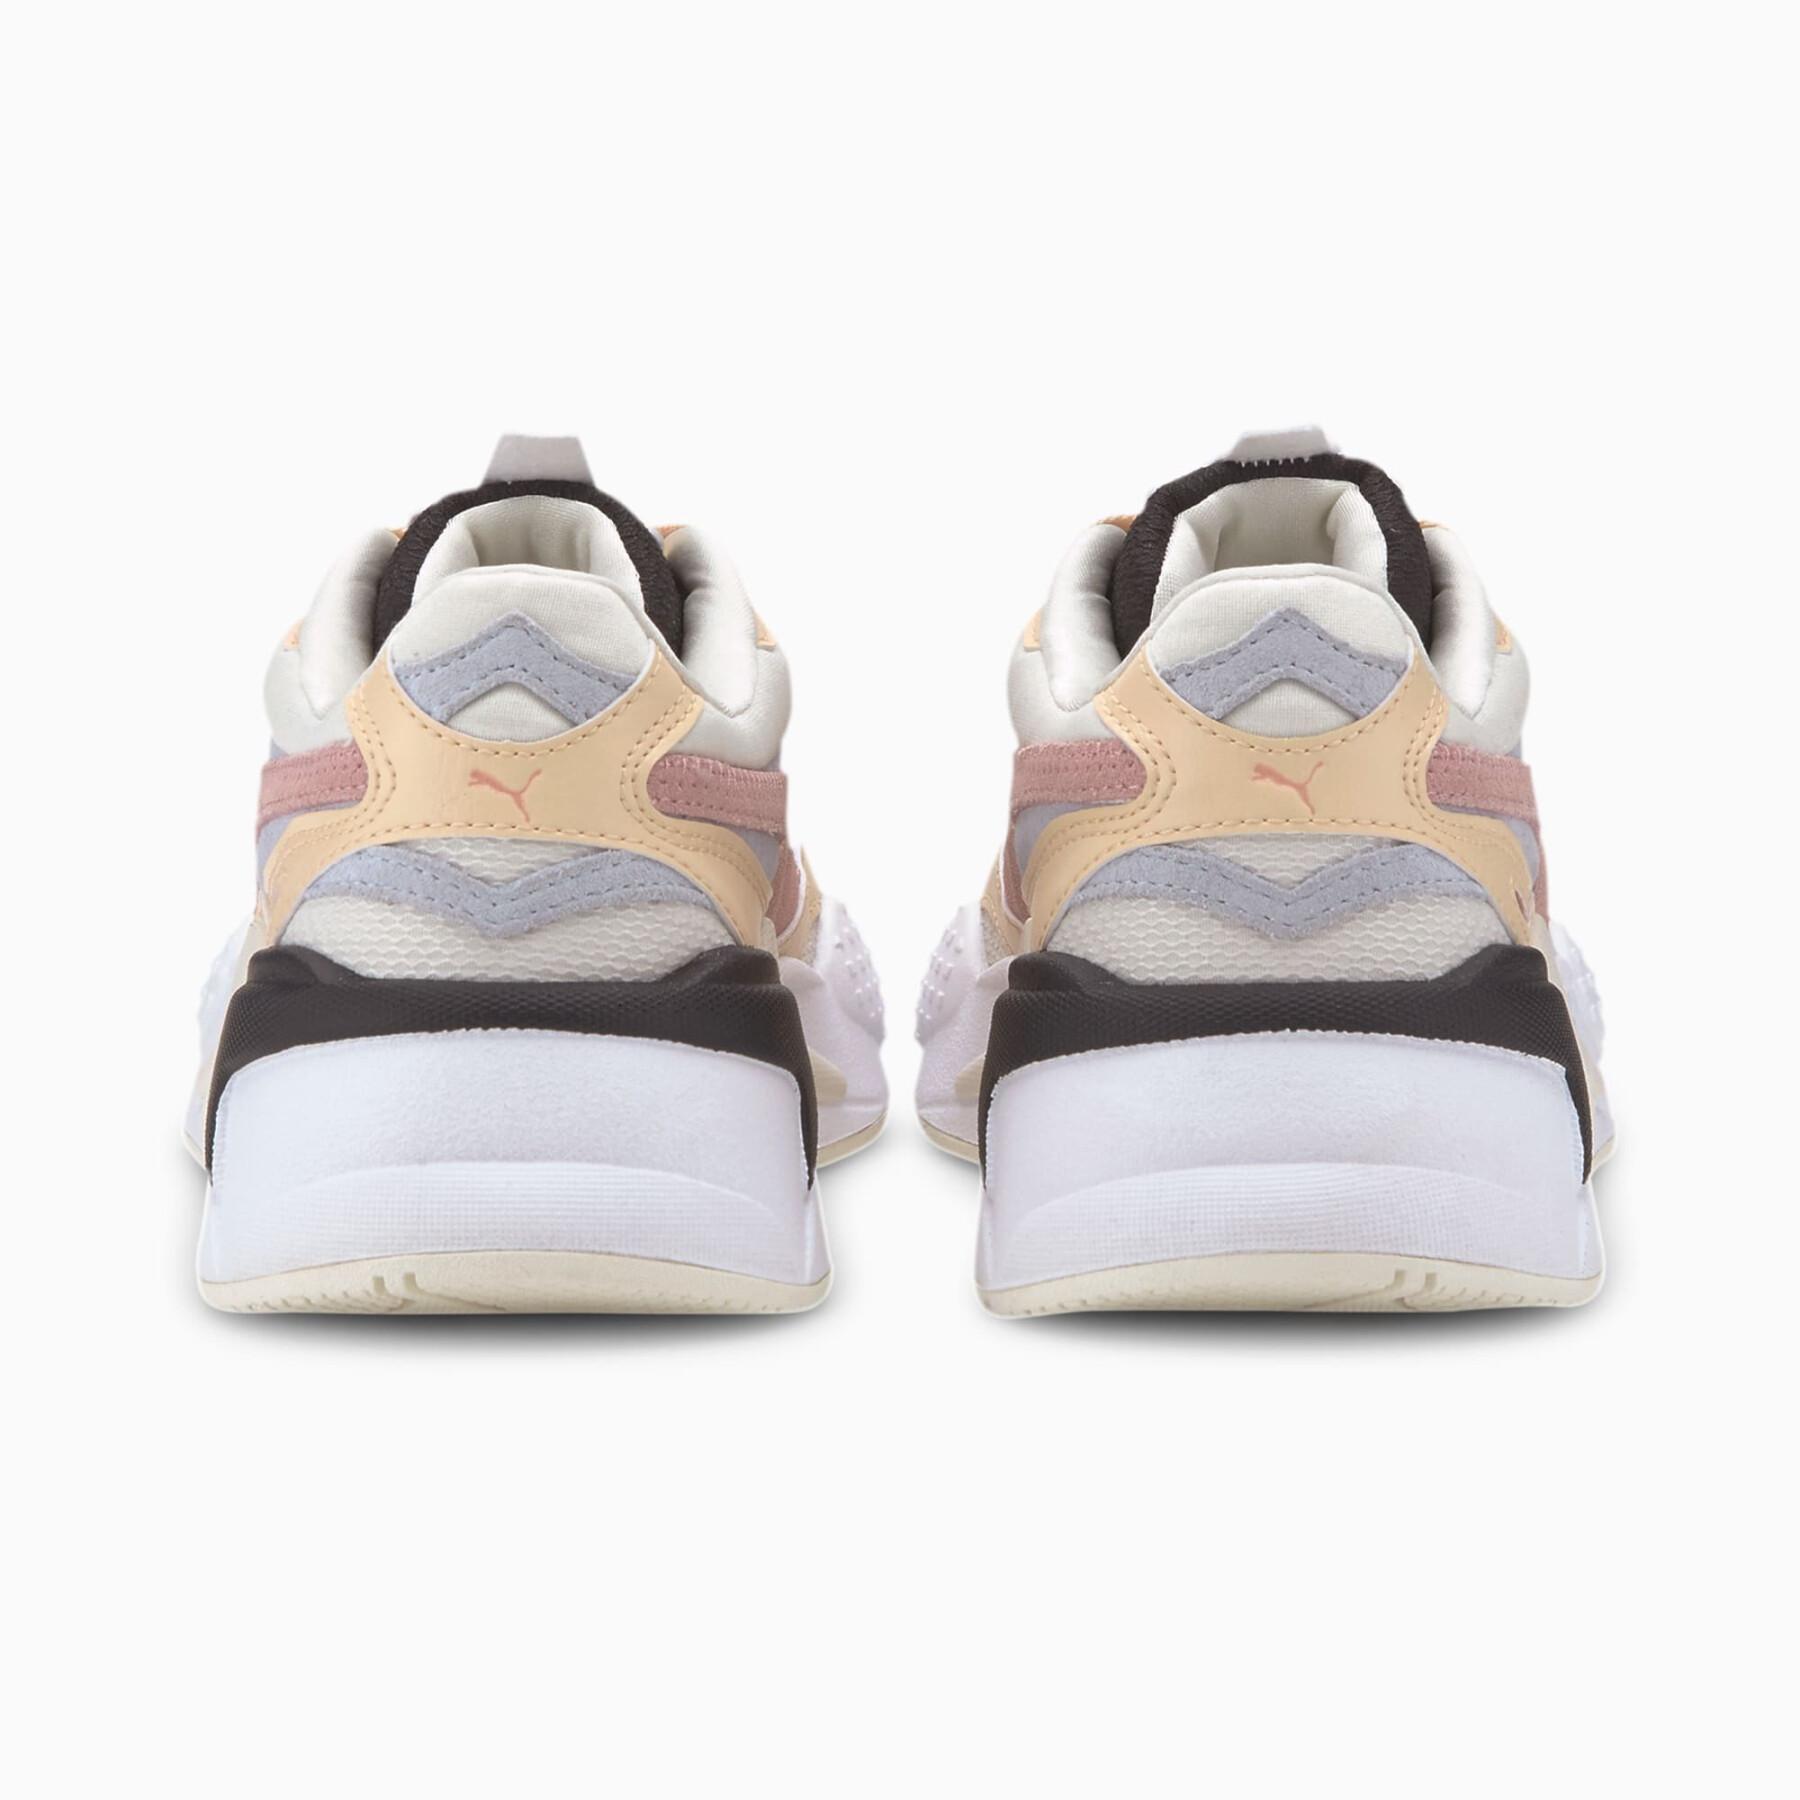 Chaussures femme Puma RS-X³ Layers